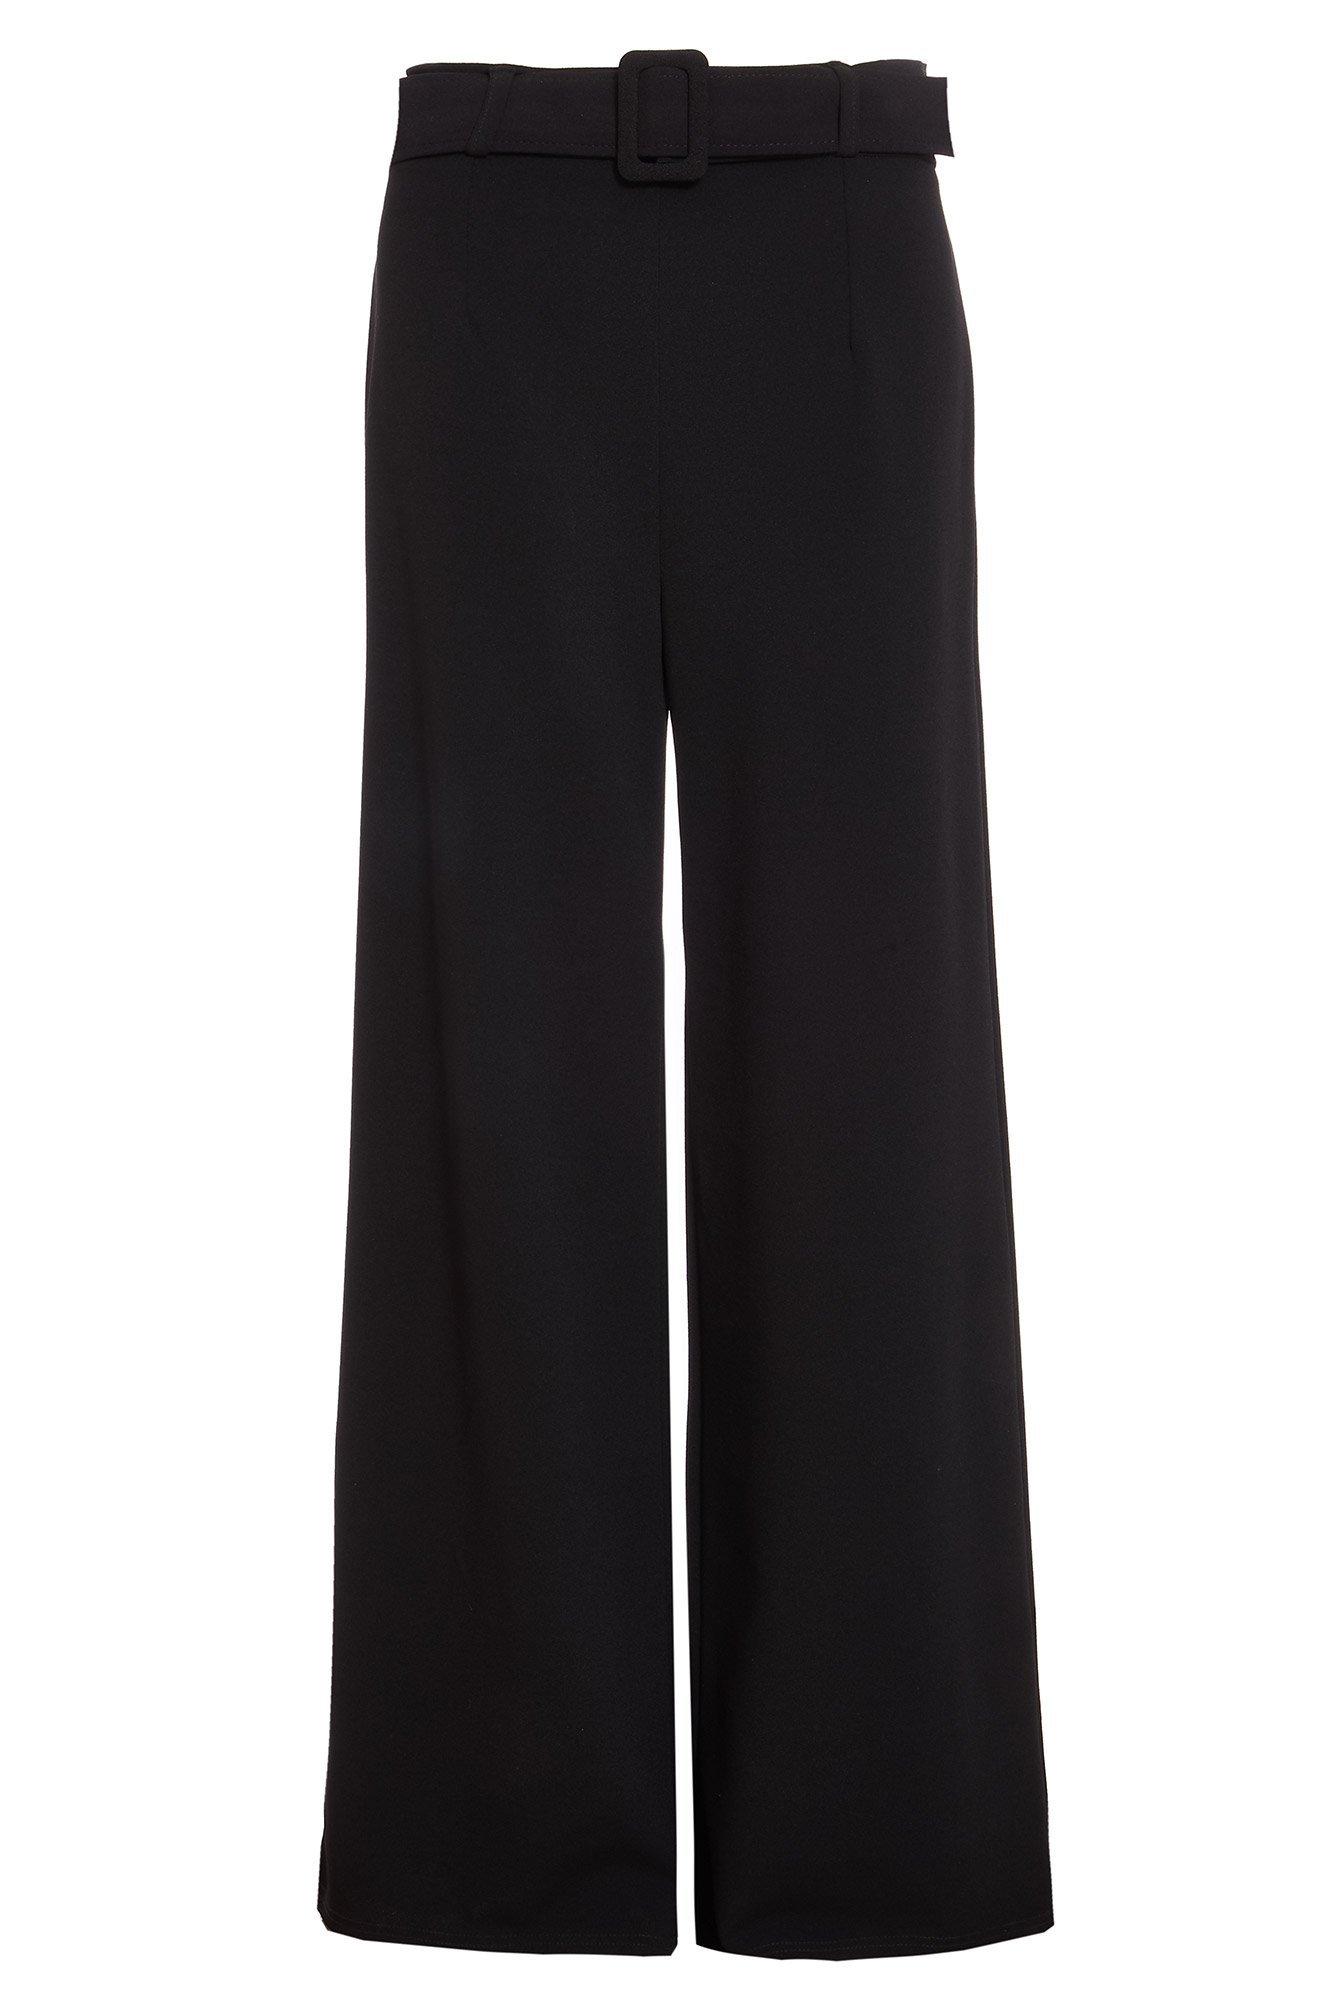 Black Belted Palazzo Trousers - Quiz Clothing